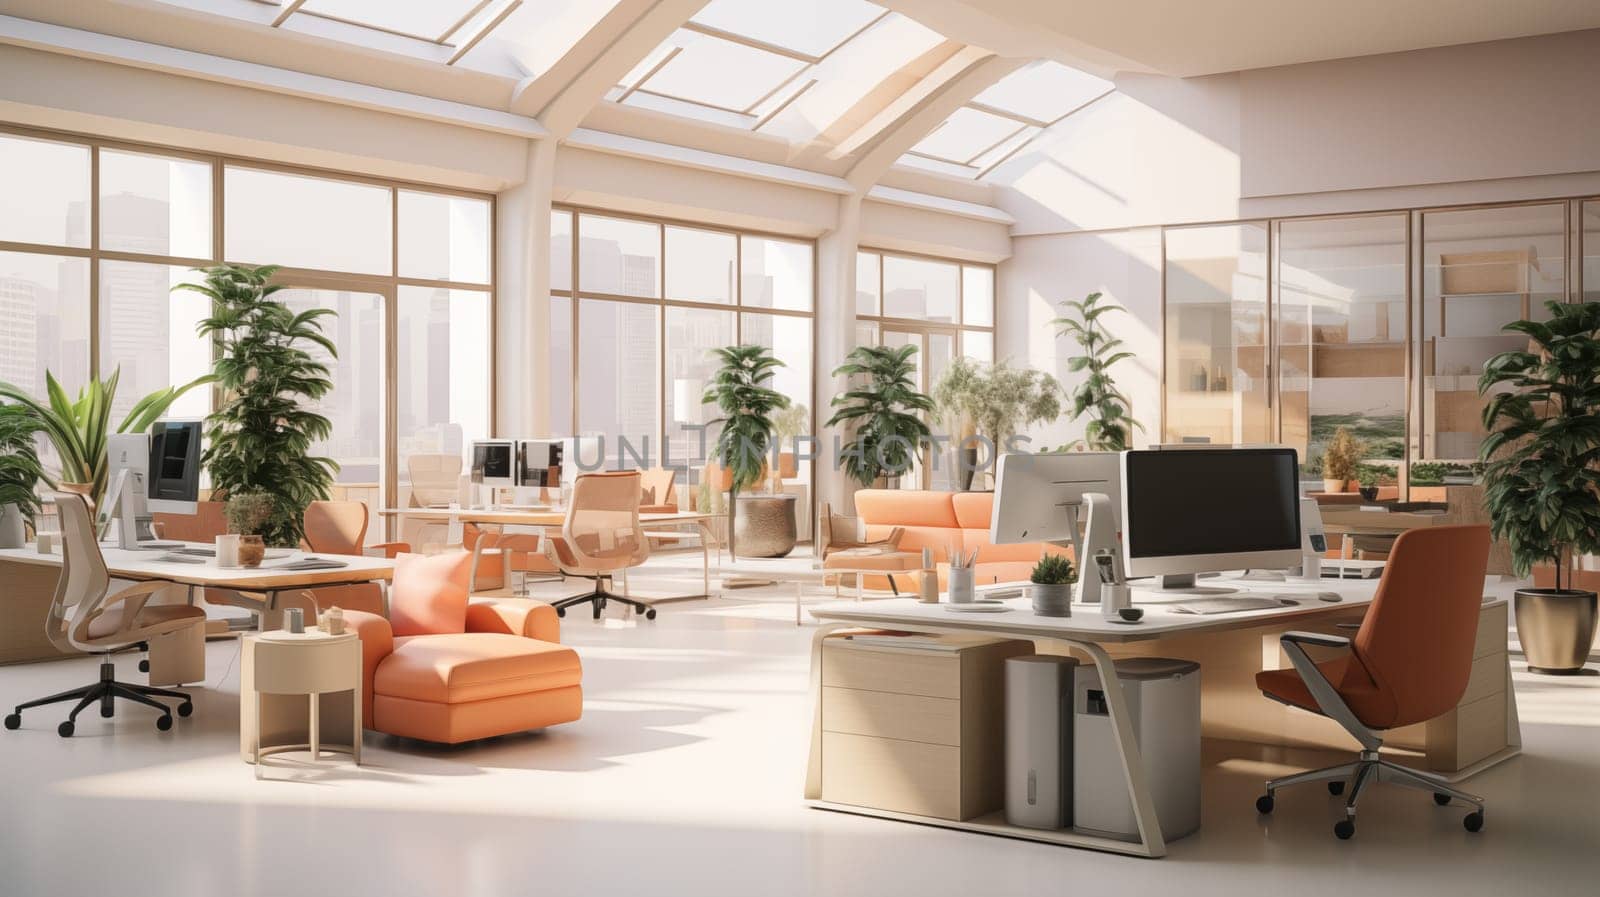 Modern office interior in light peach color, modern workspace with natural lighting.